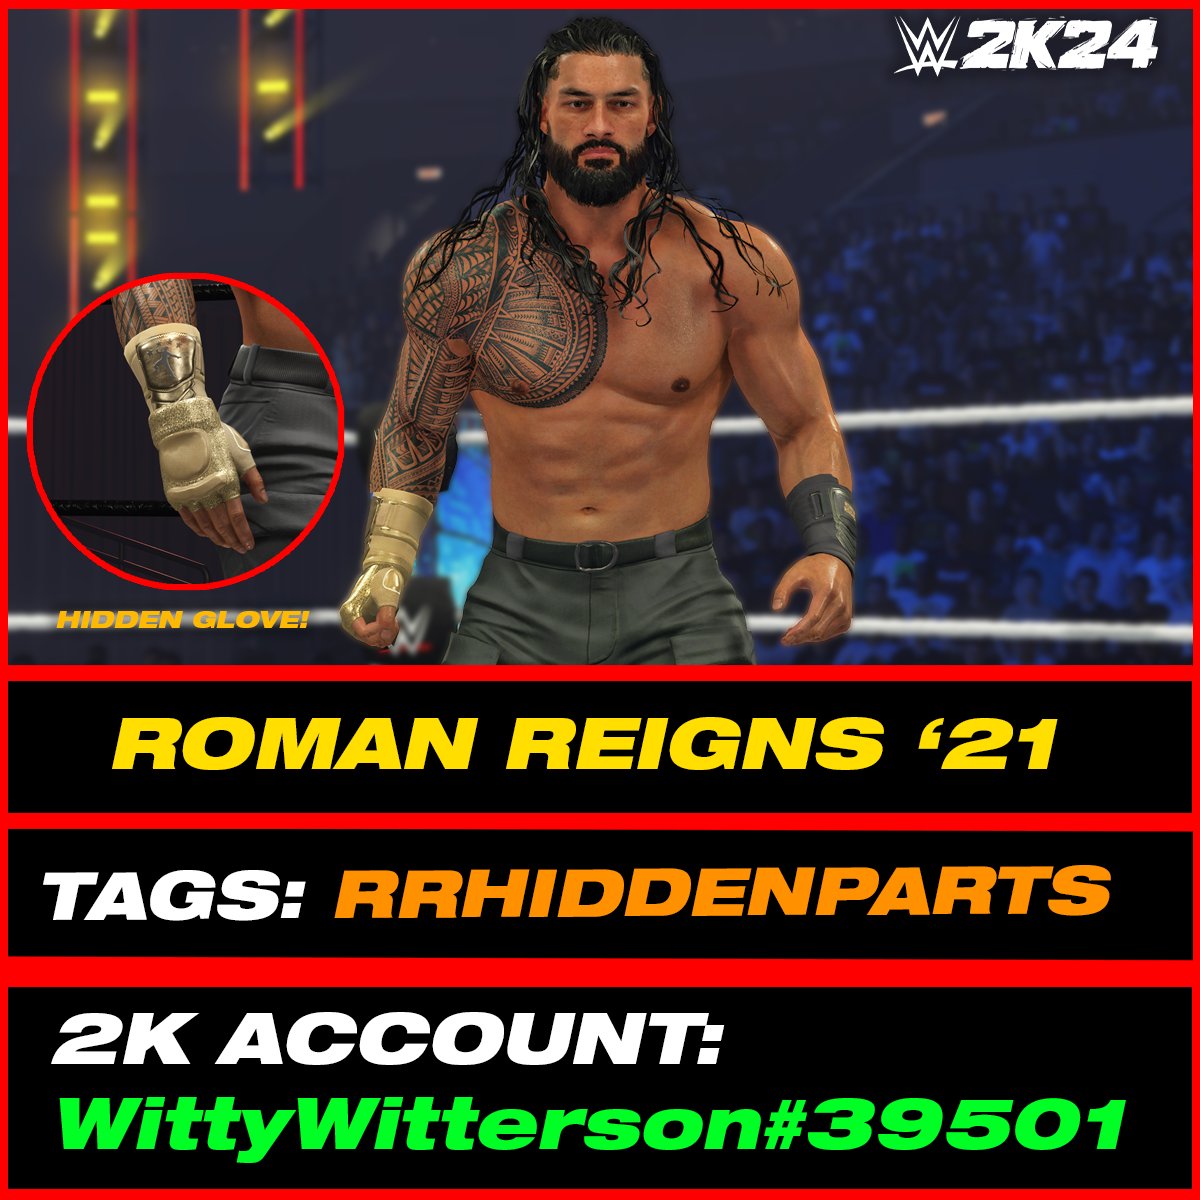 Roman Reigns '21 is uploaded onto Community Creations #WWE2K24 

•Hashtags are: RRHIDDENPARTS, WITTY226, RomanReigns

INCLUDES:
• 4 Hidden Attire Parts
• Roman Reigns Commentary
• 'Roman Reigns' Call Name

• Automatic Alt Attire to Roman Reigns